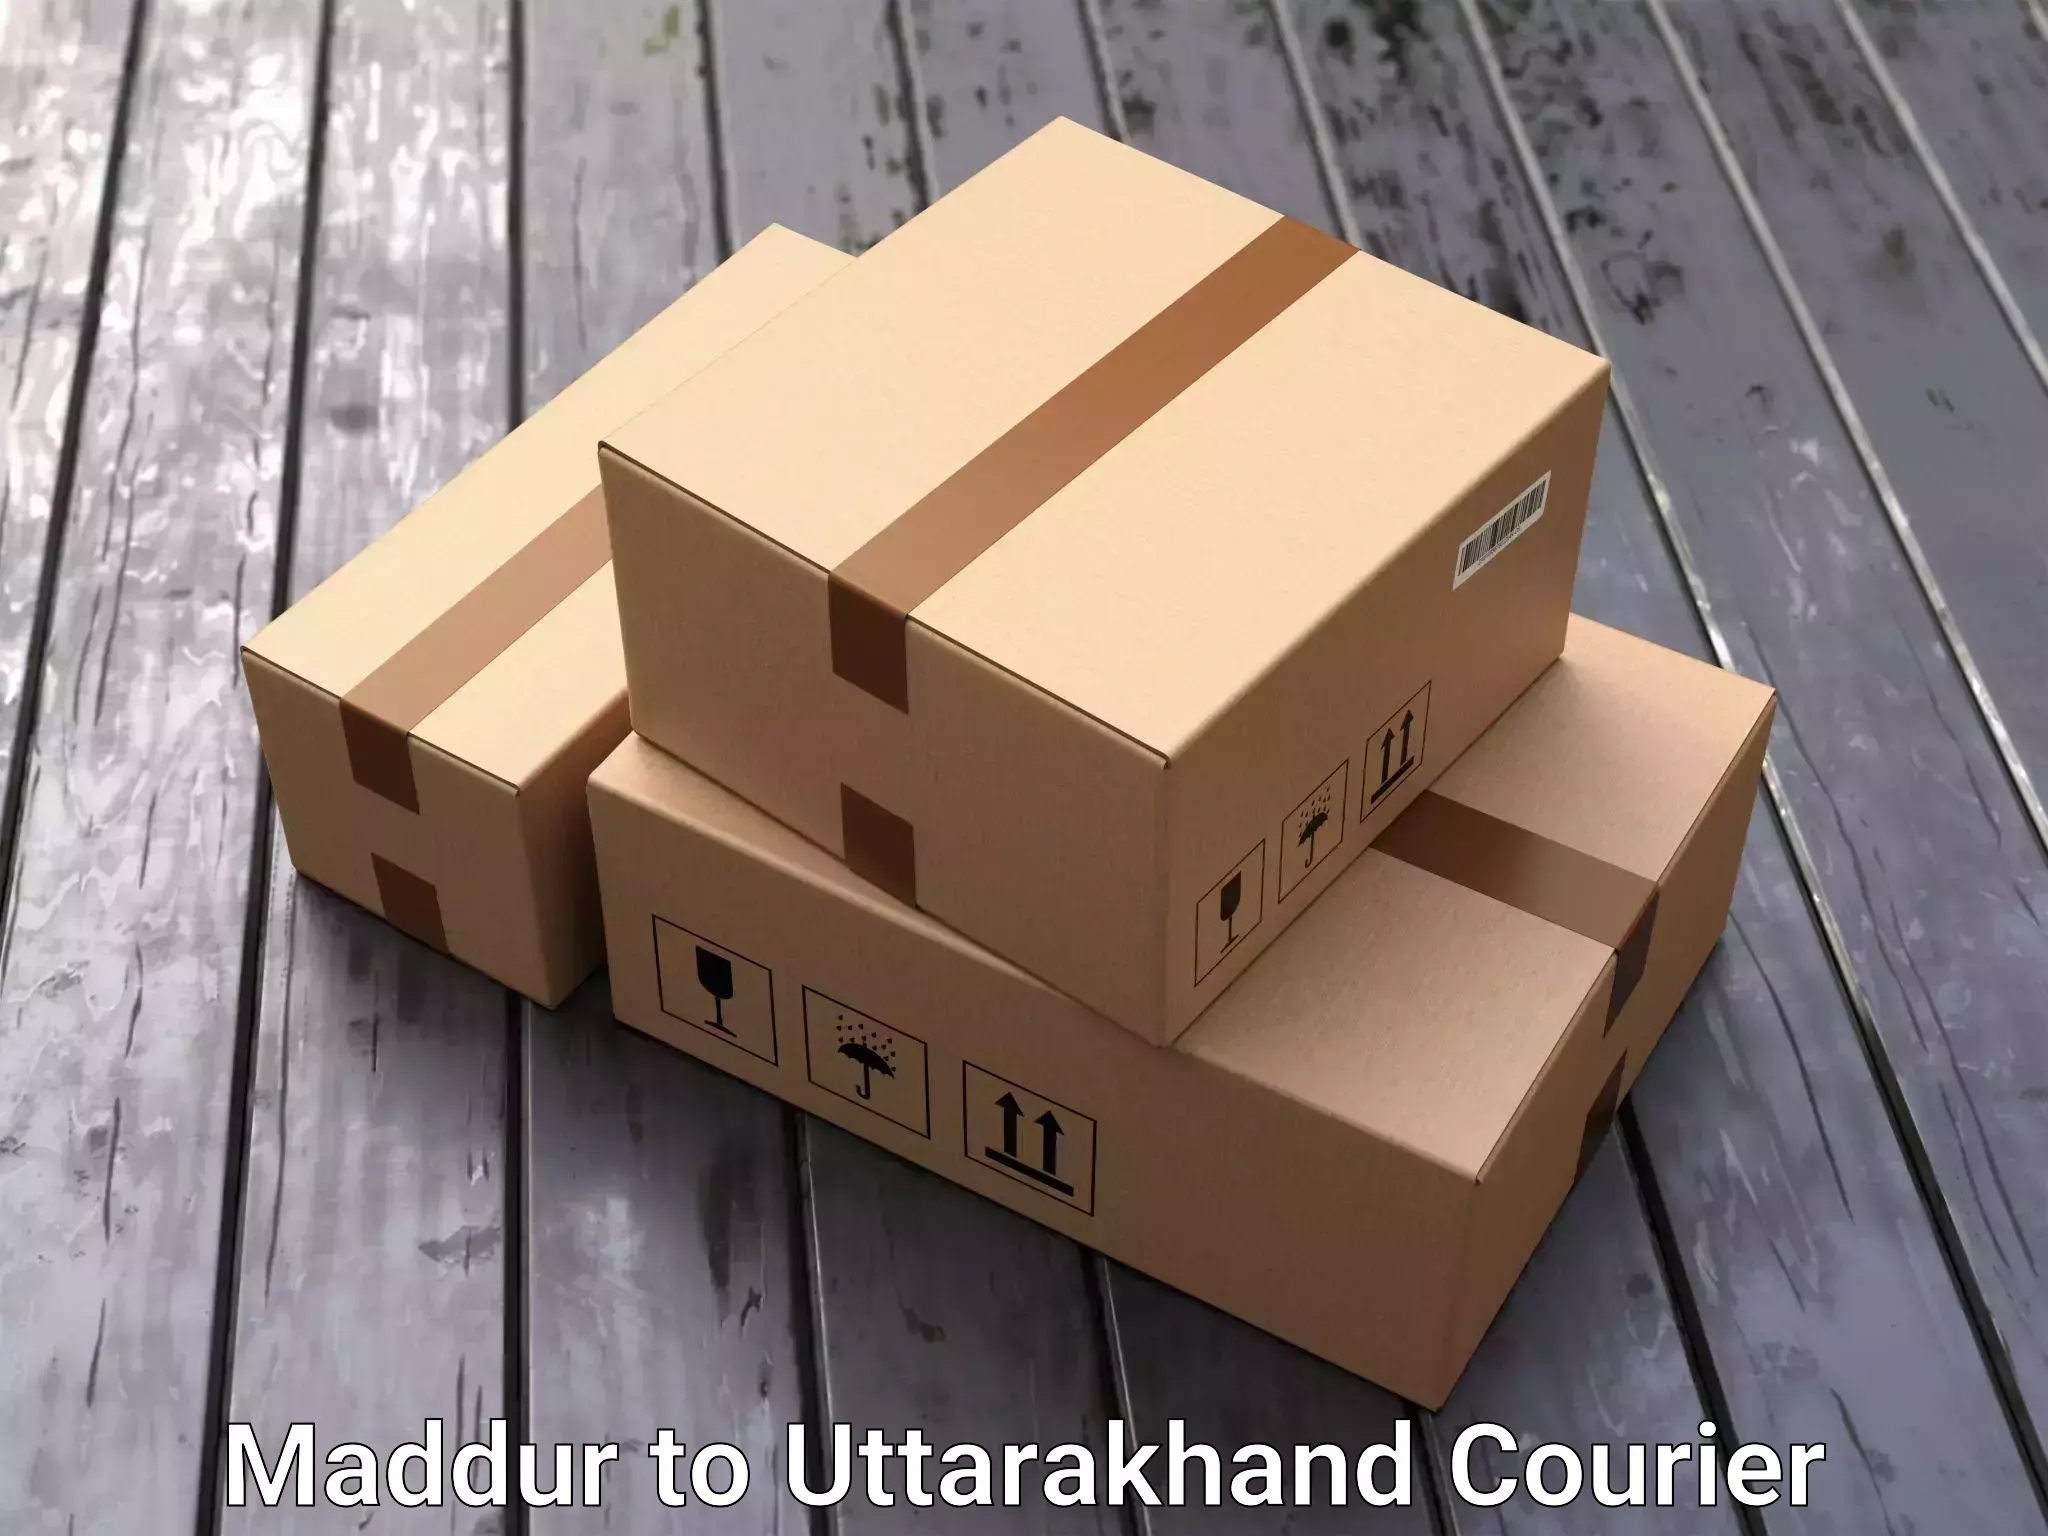 Efficient relocation services Maddur to Rishikesh